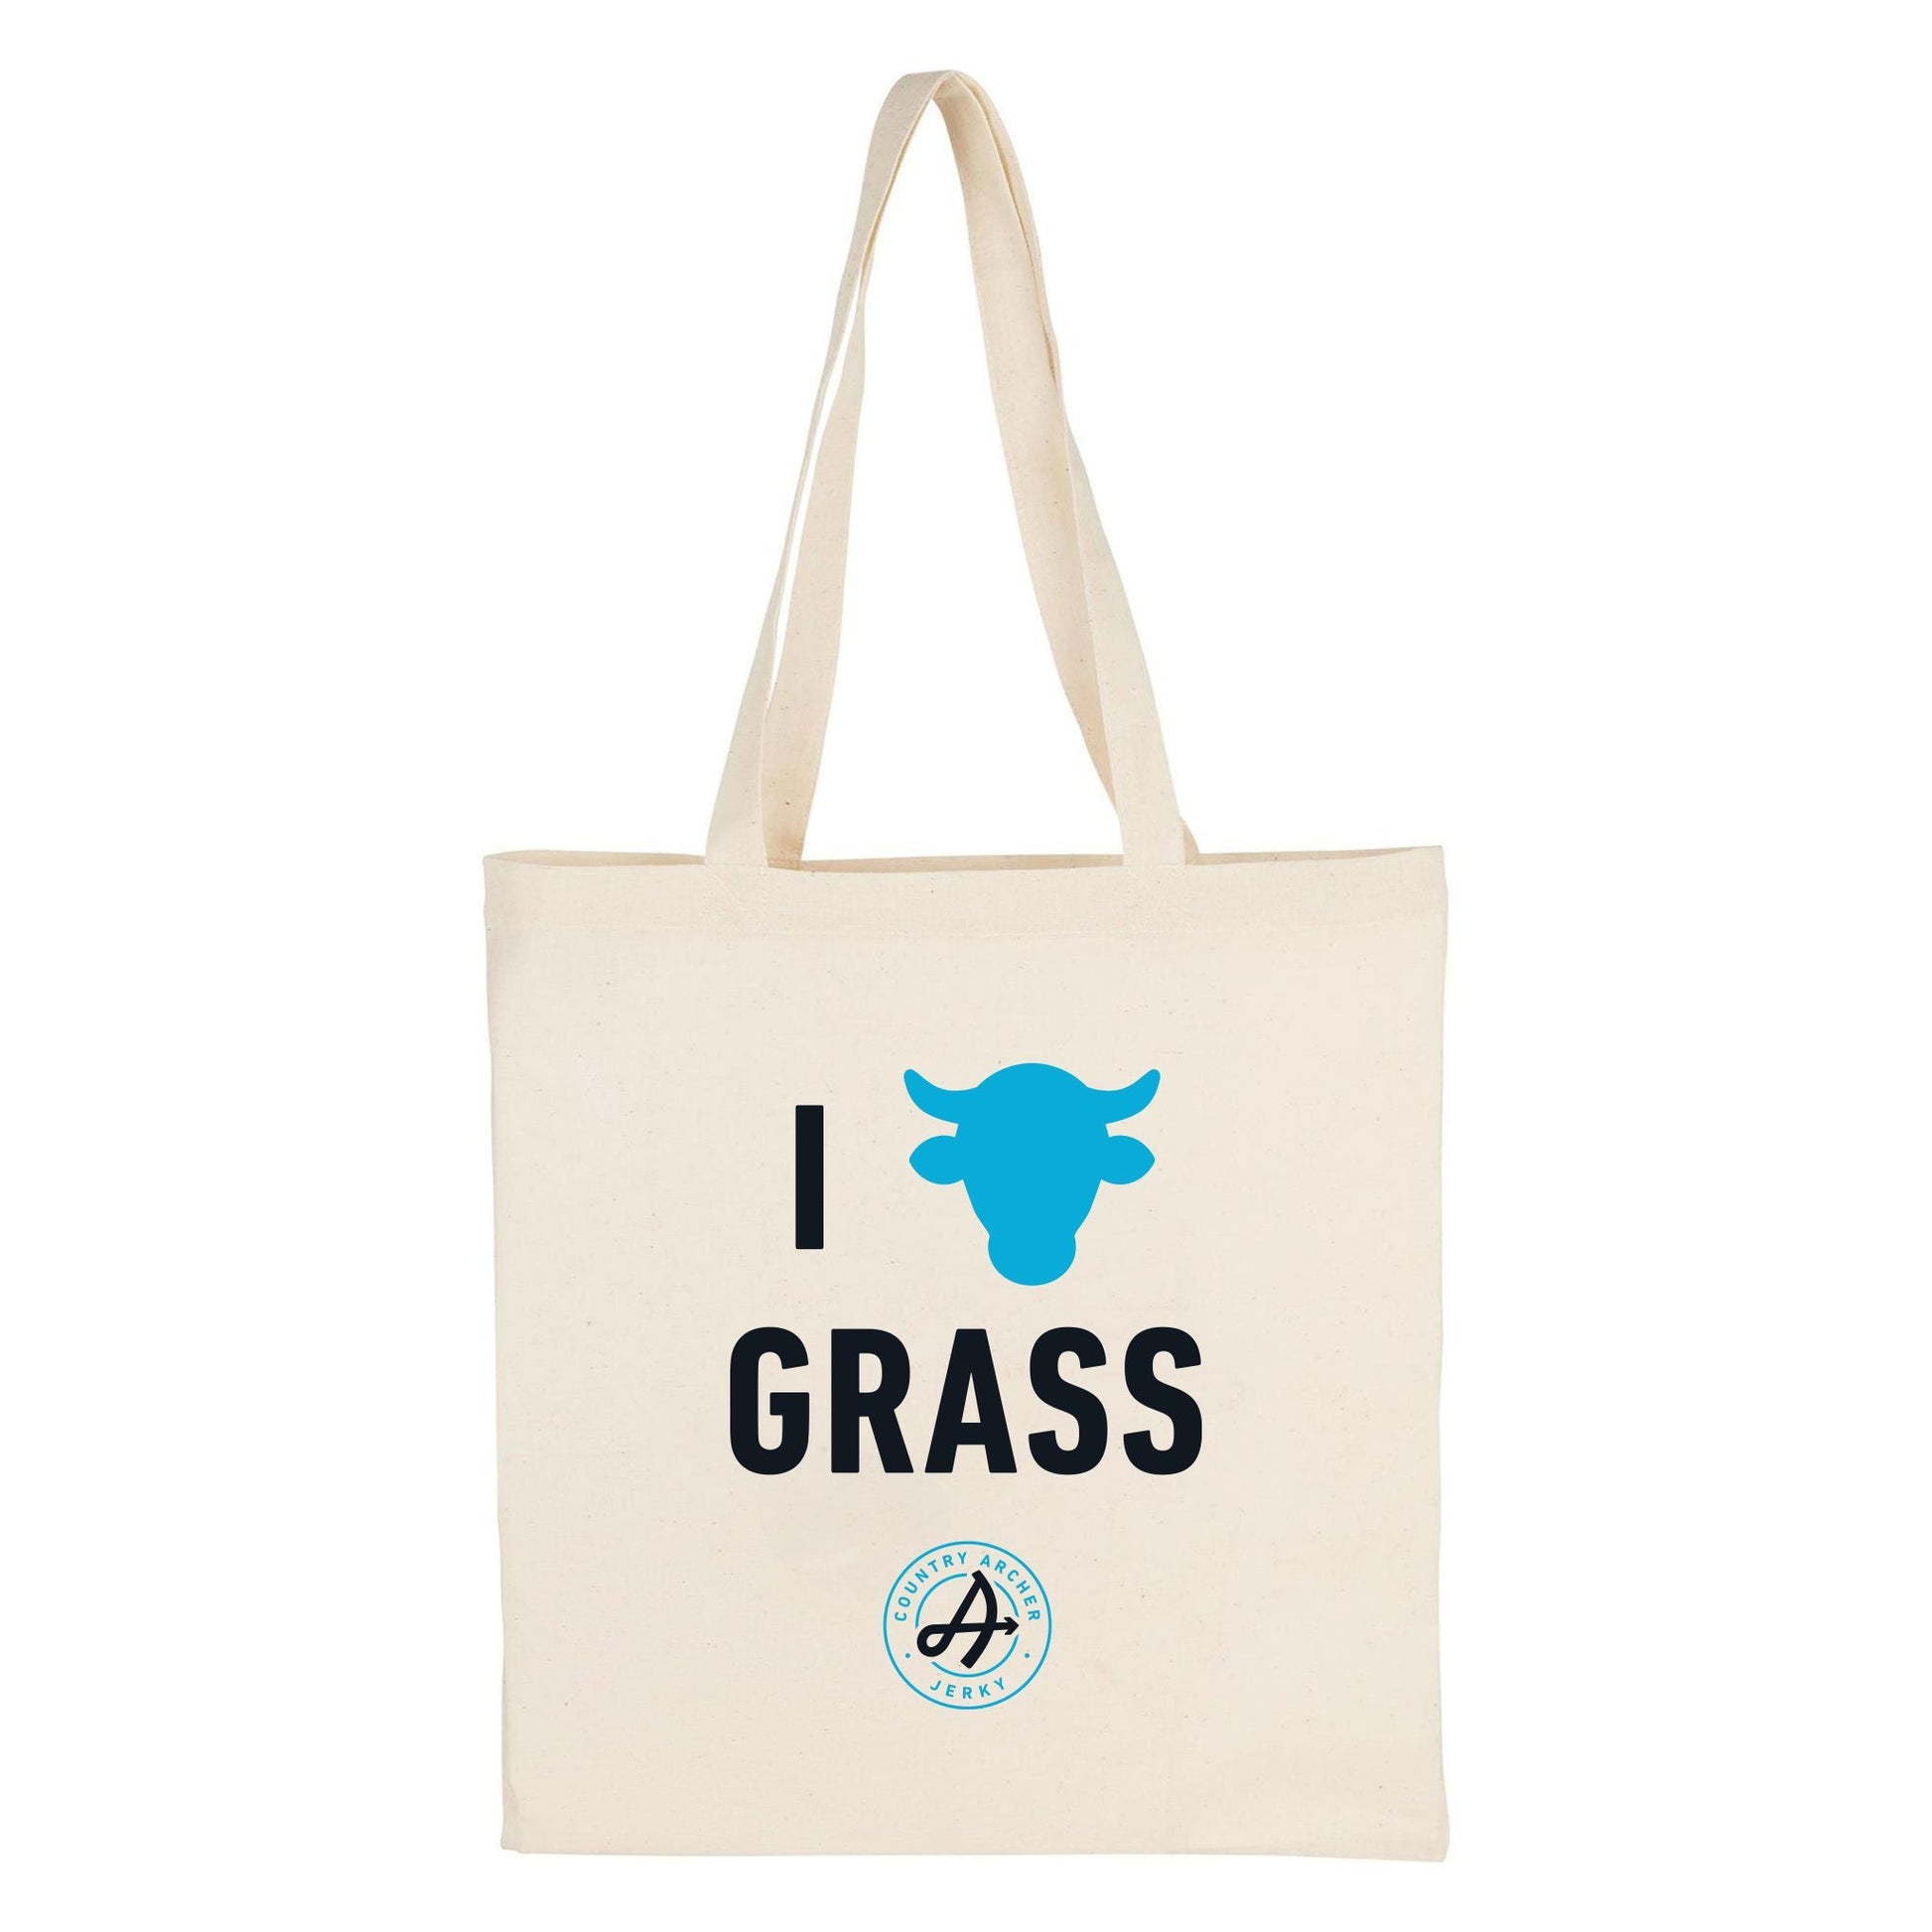  I Beef Grass Tote by Country Archer, I Beef Grass Tote, gifts - grasshole - variety p, i-beef-grass-tote, , White Tote